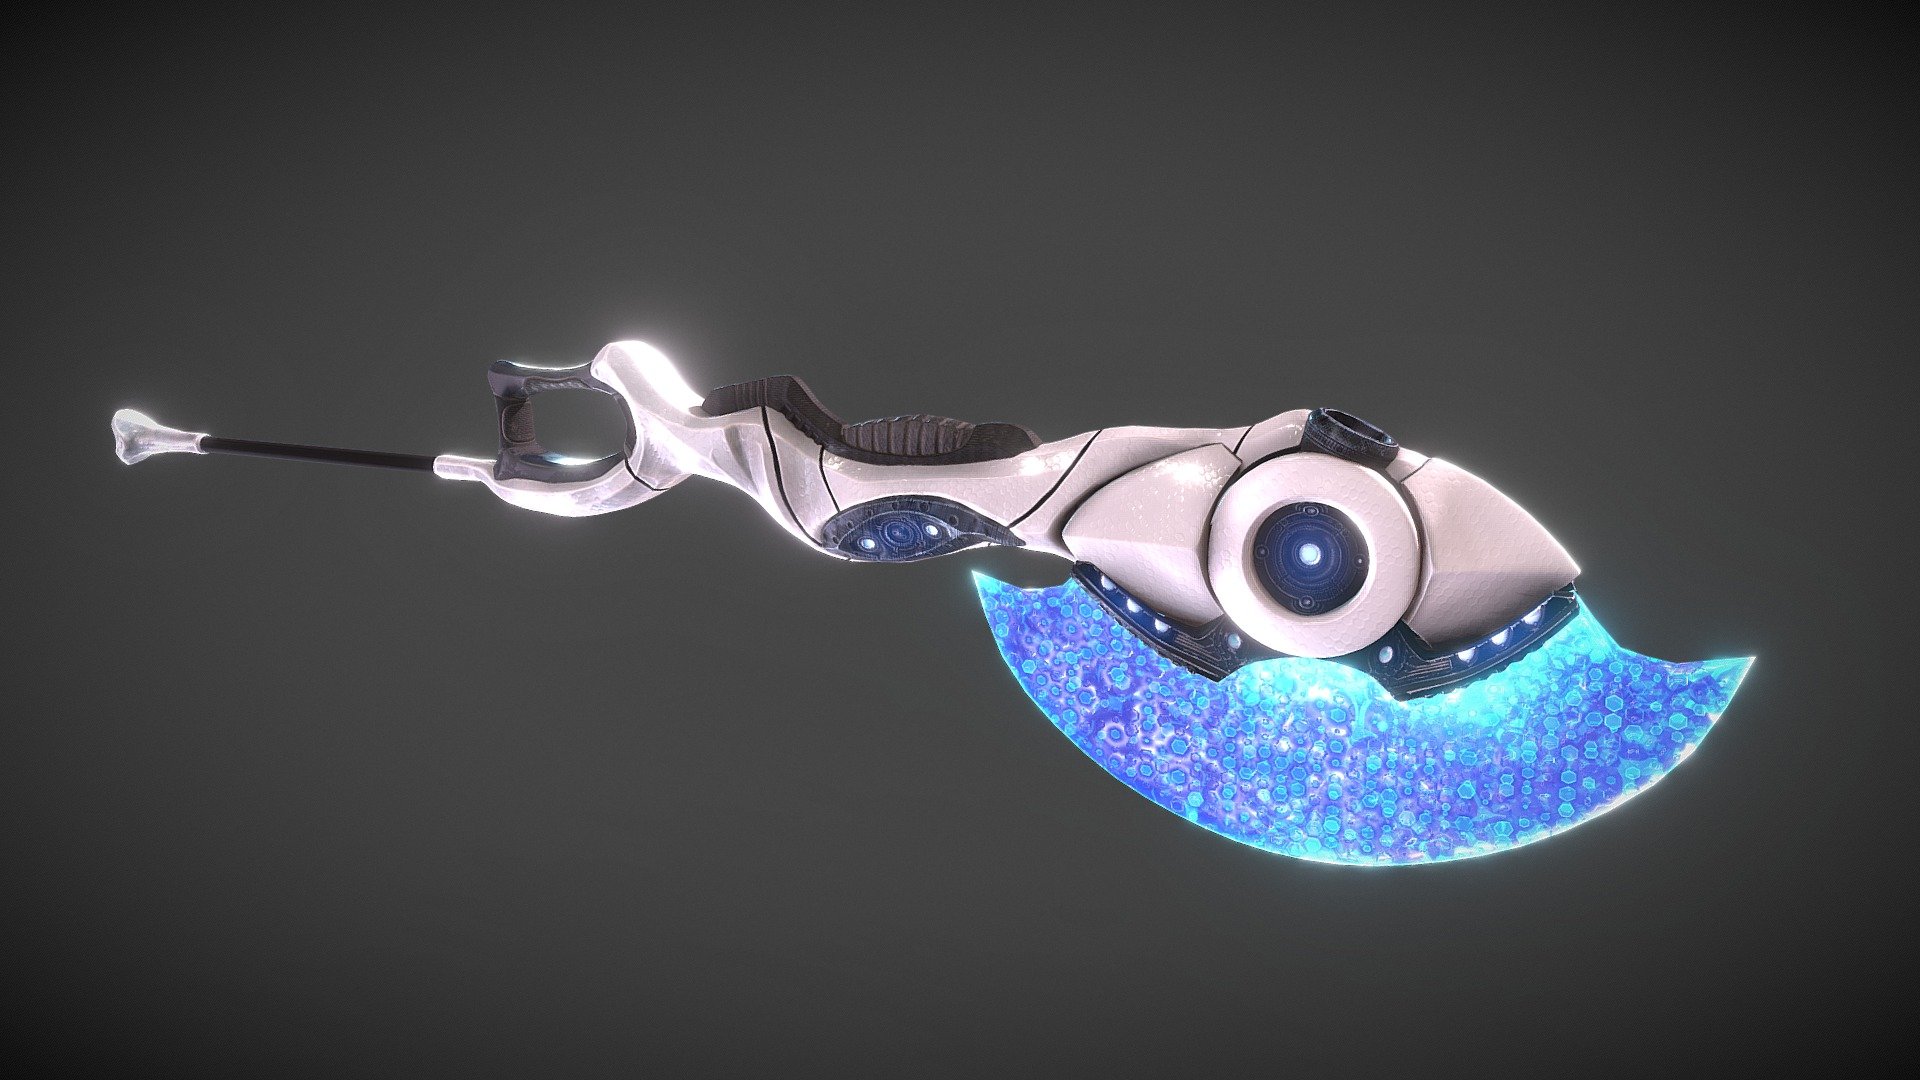 Another part of the SciFi weapon series I’m working on. This Greataxe has the same specifications as the other weapons in the set and can be used in games or other realtime projects. Full PBR texture set included 3d model